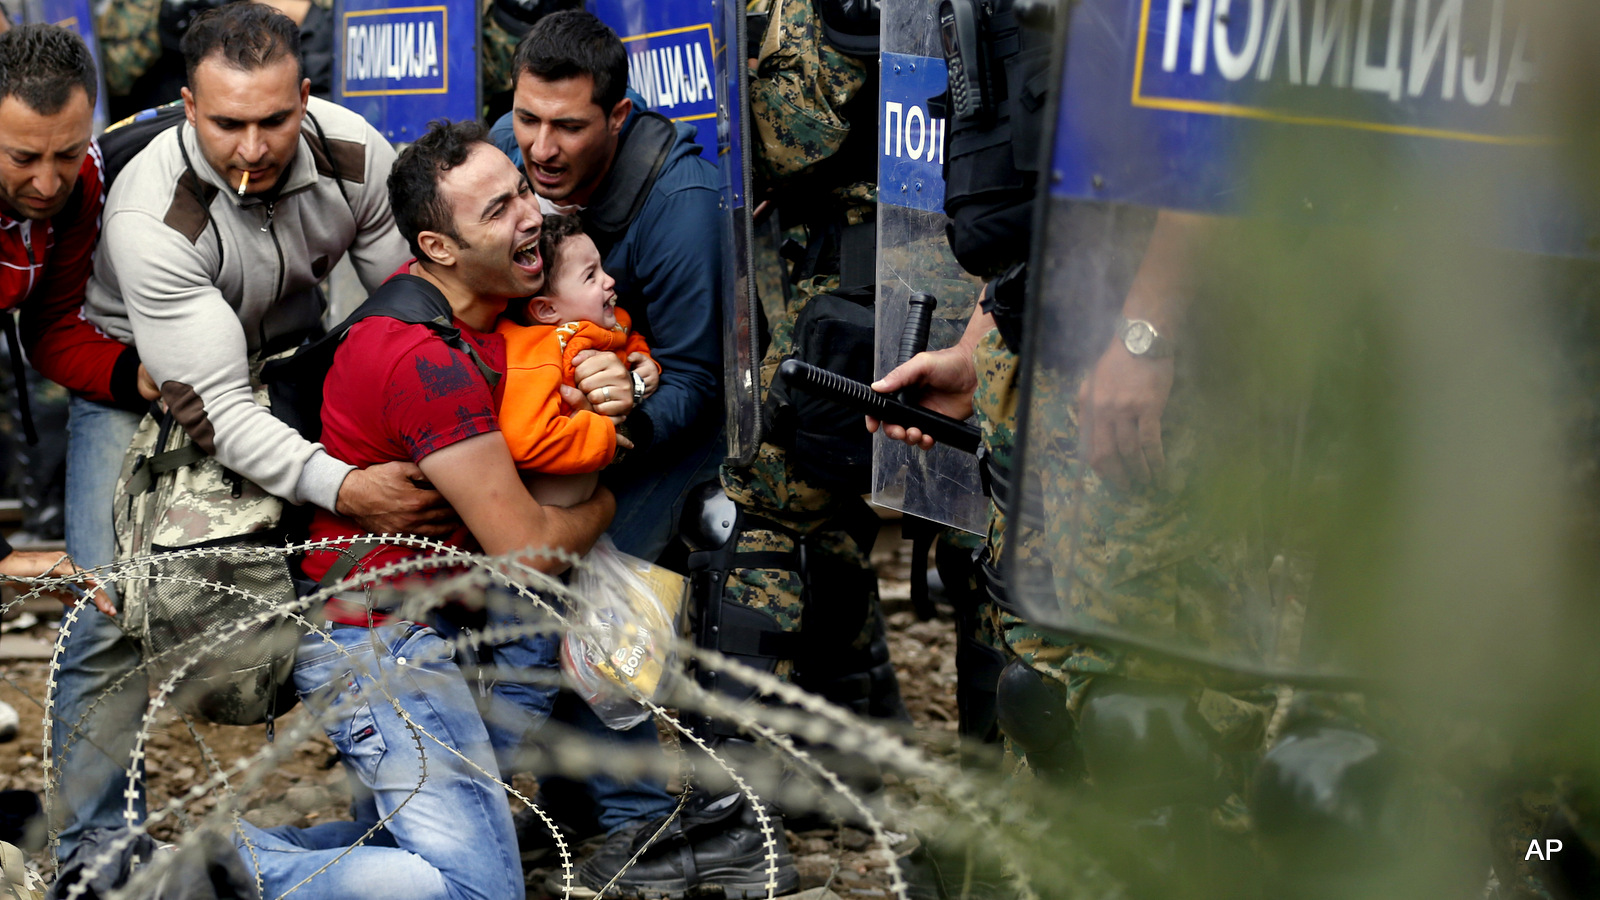 Migrant men help a fellow migrant man holding a boy as they are stuck between Macedonian riot police officers and migrants during a clash near the border train station of Idomeni, northern Greece, as they wait to be allowed by the Macedonian police to cross the border from Greece to Macedonia, Friday, Aug. 21, 2015. Macedonian special police forces have fired stun grenades to disperse thousands of migrants stuck on a no-man's land with Greece, a day after Macedonia declared a state of emergency on its borders to deal with a massive influx of migrants heading north to Europe. (AP Photo/Darko Vojinovic)